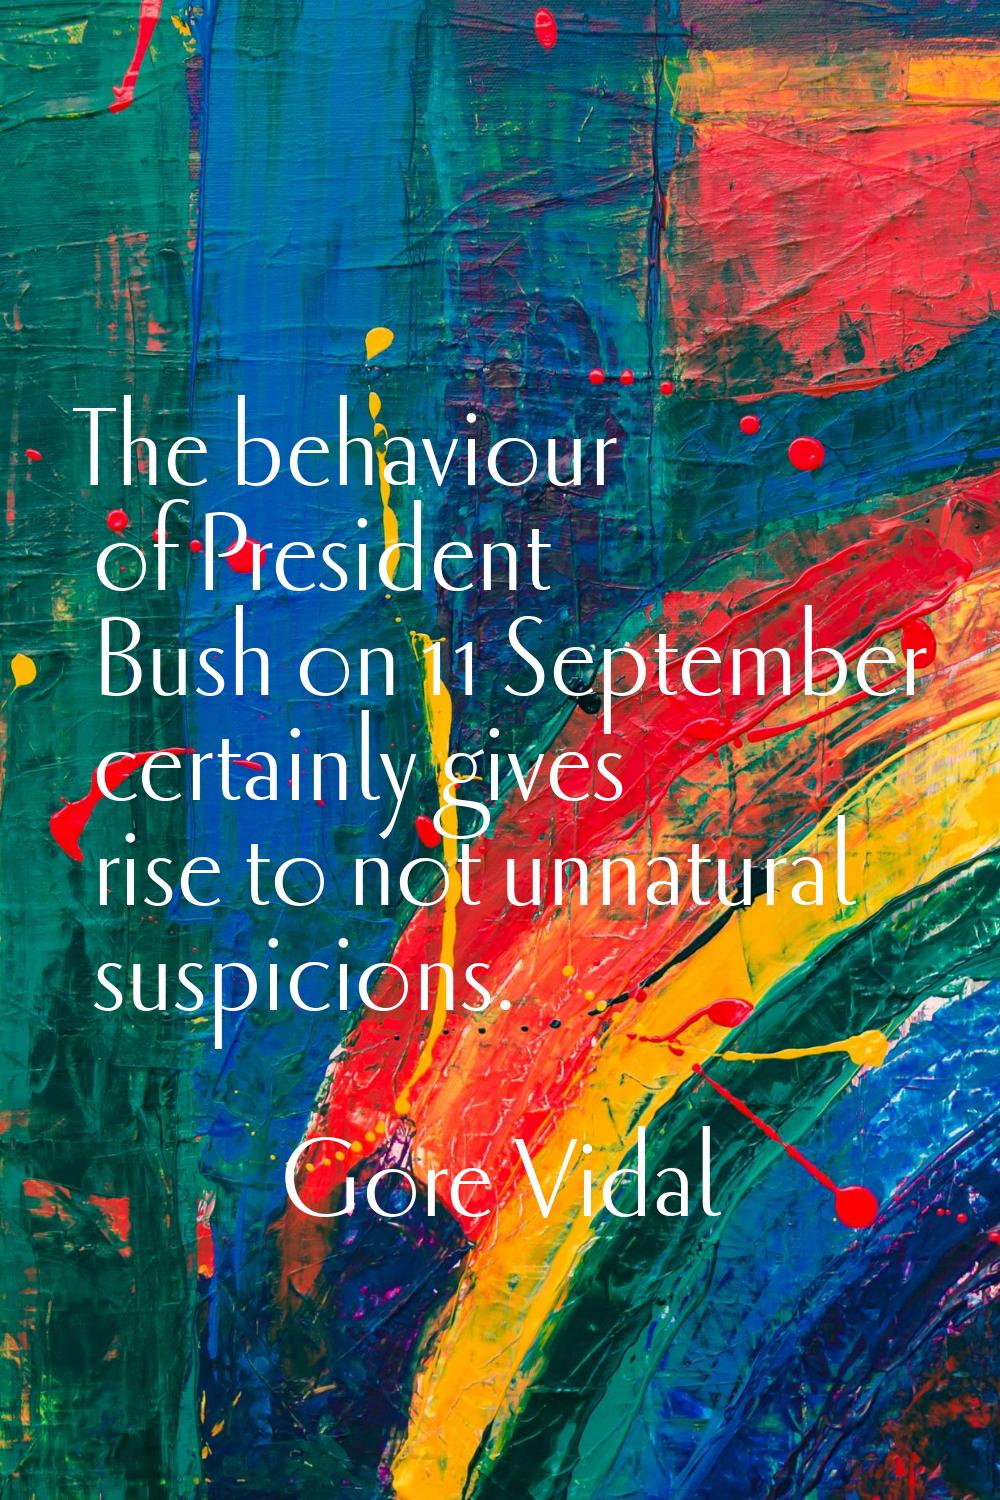 The behaviour of President Bush on 11 September certainly gives rise to not unnatural suspicions.